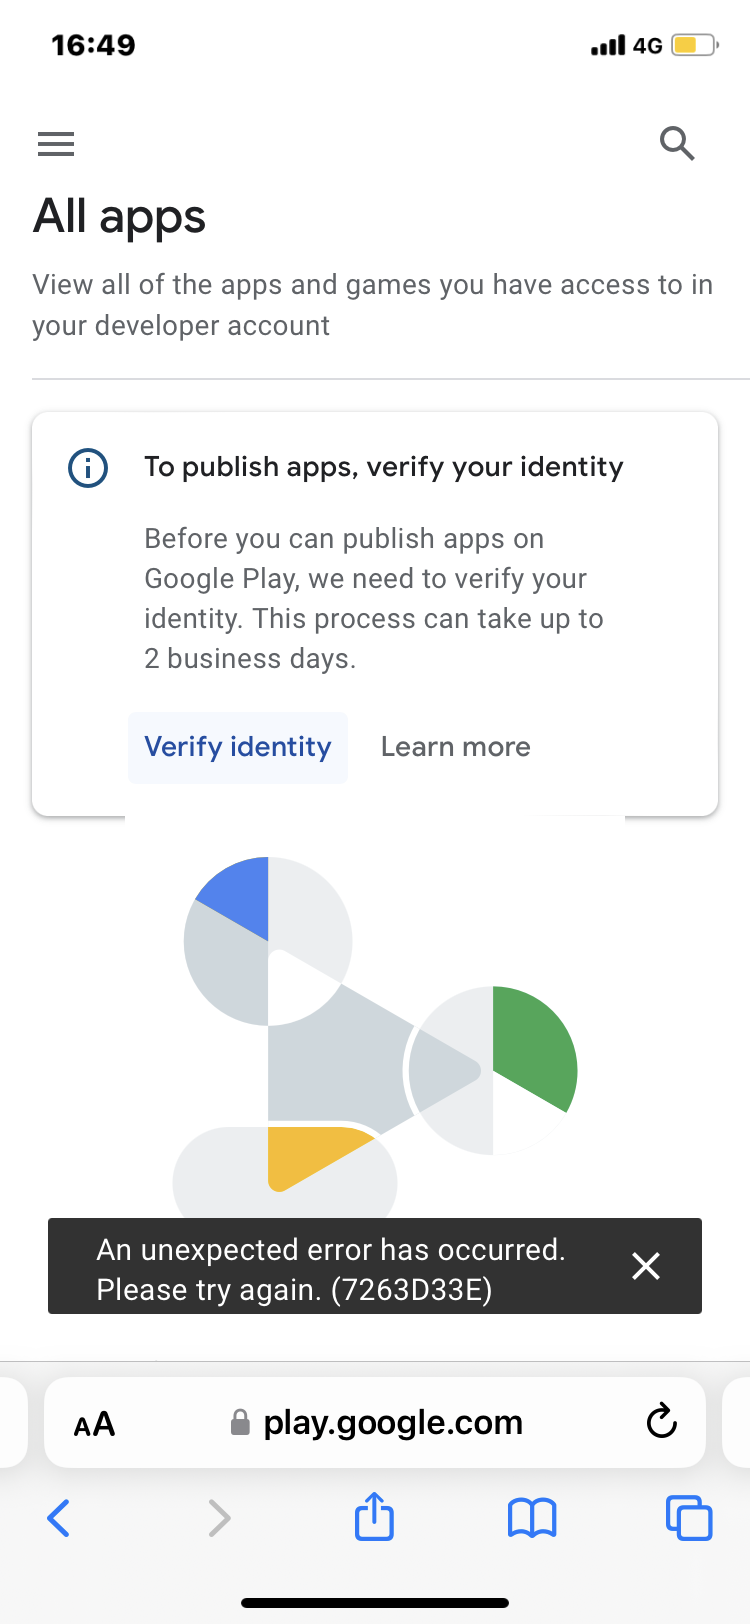 How to Edit Your Google Play Games Profile